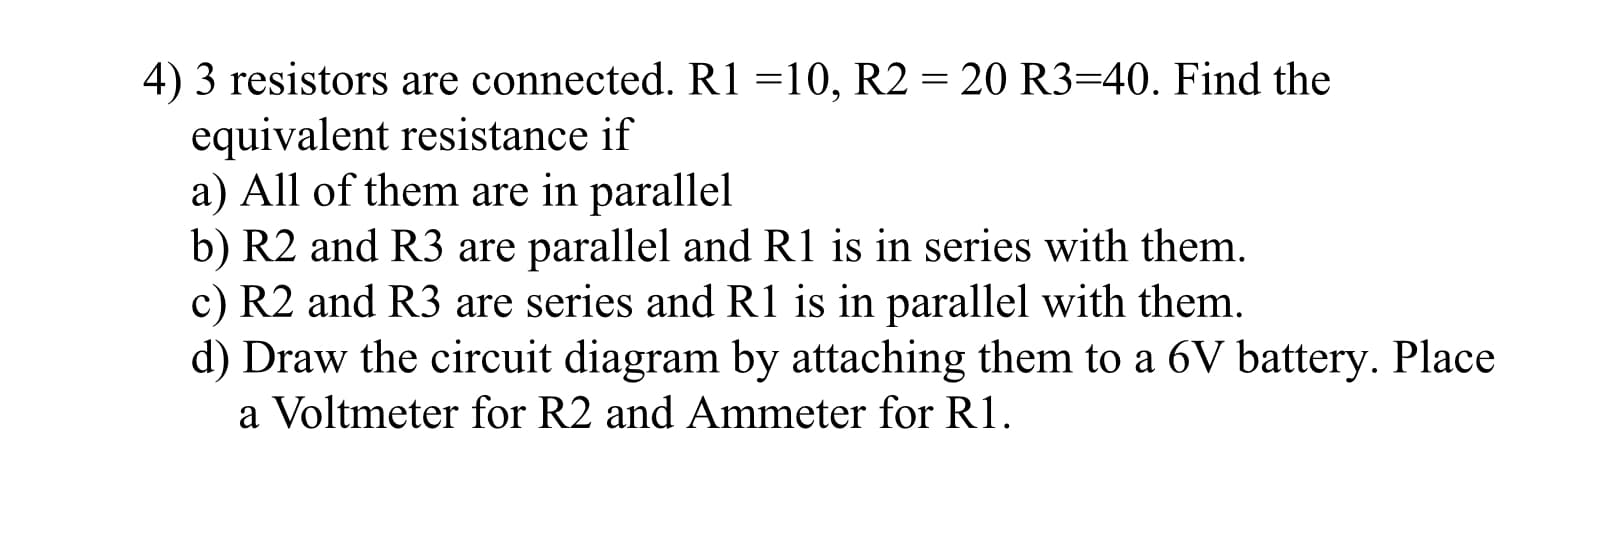 4) 3 resistors are connected. R1 =10, R2 = 20 R3=40. Find the
equivalent resistance if
a) All of them are in parallel
b) R2 and R3 are parallel and R1 is in series with them.
c) R2 and R3 are series and R1 is in parallel with them.
|3D
d) Draw the circuit diagram by attaching them to a 6V battery. Place
a Voltmeter for R2 and Ammeter for R1.
